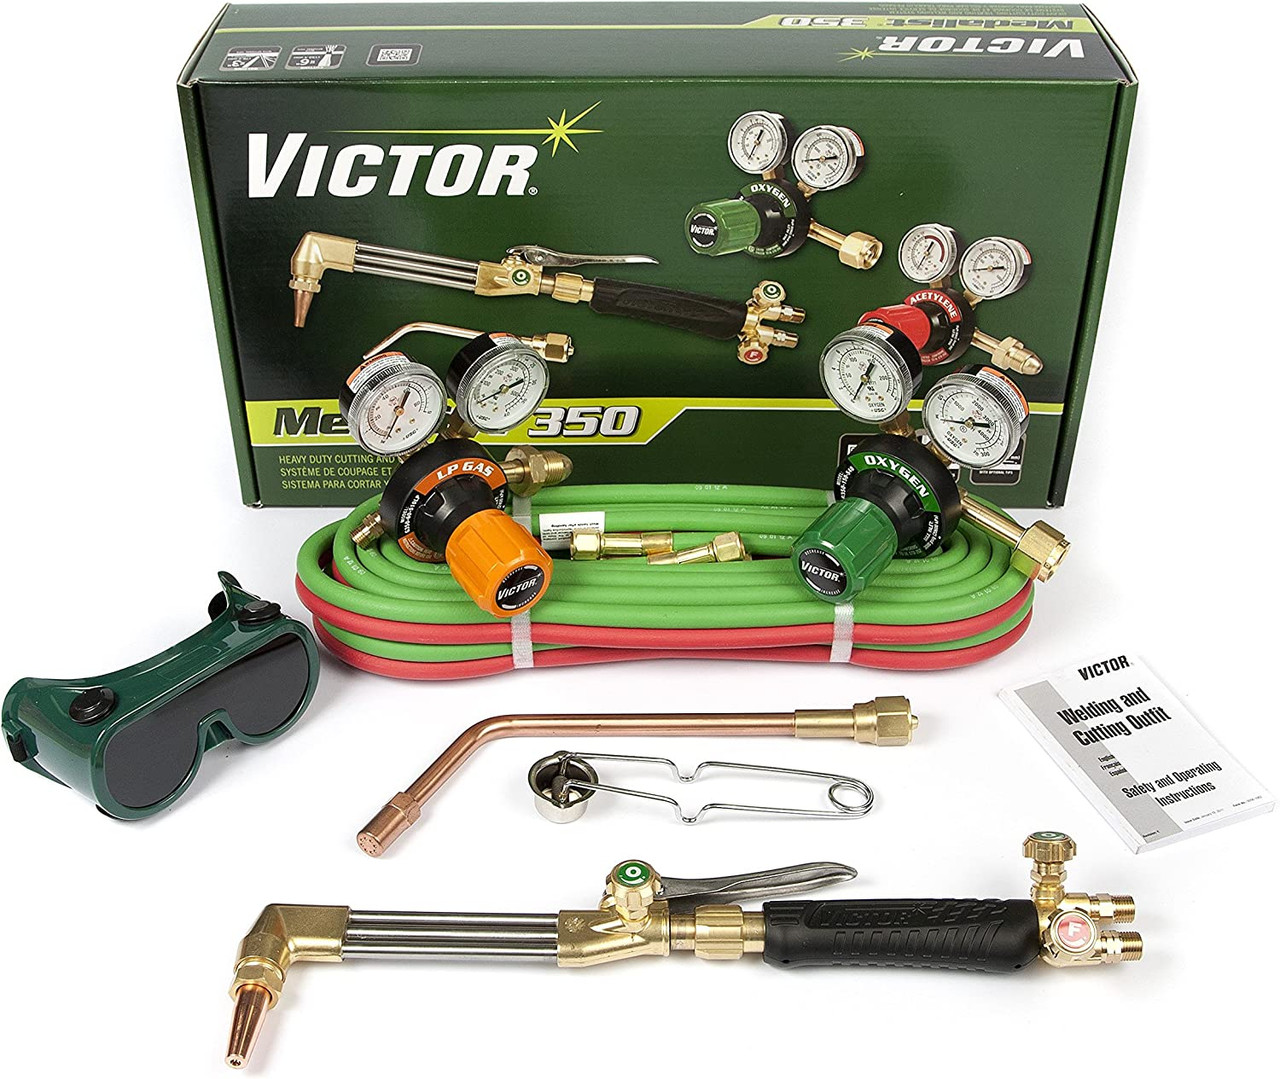 Victor 0384-2692 Medalist HD Acetylene Cutting and Welding System, 350 Series, Color Coded Gas Regulators, Handle, Cutting Attachment, Goggles, Striker, up to 6" Cutting, 3" Welding